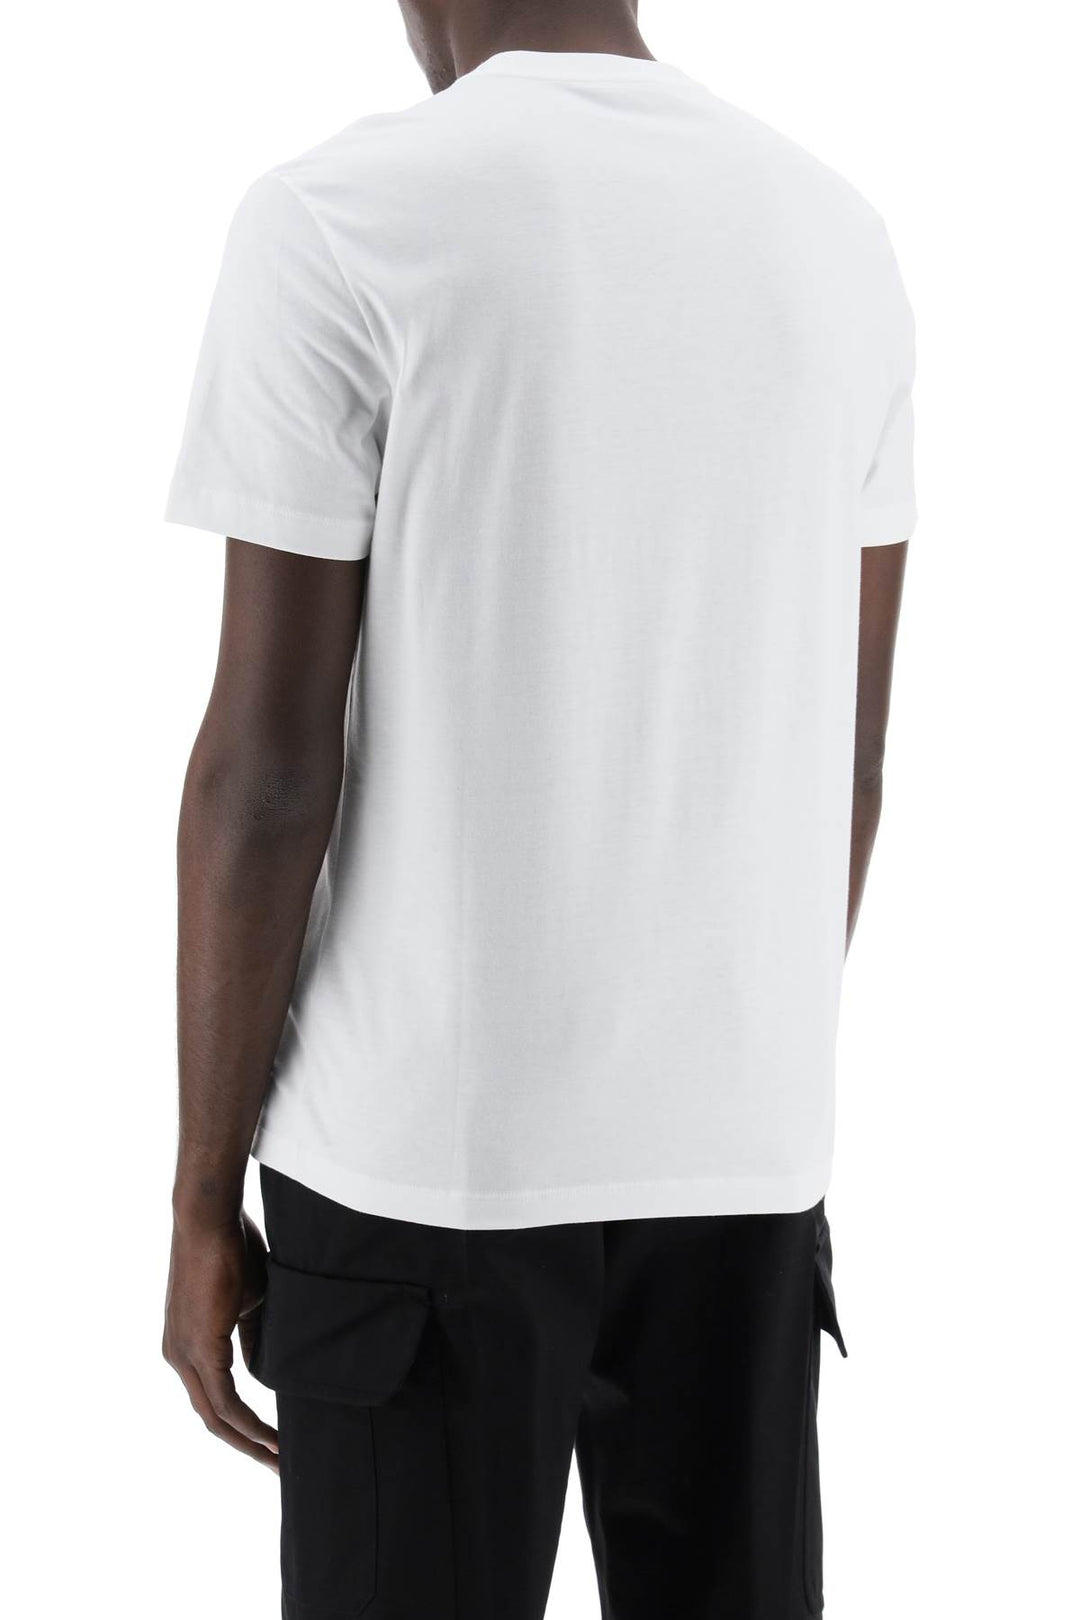 Versace Embroidered Logo T Shirt   Bianco